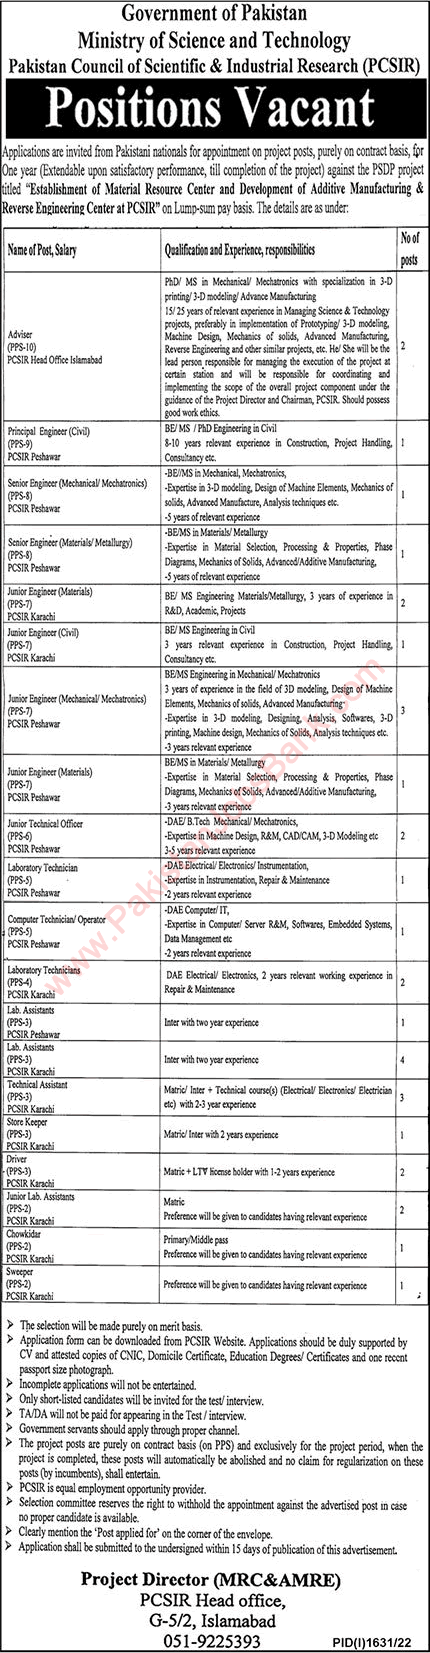 Ministry of Science and Technology Jobs September 2022 PCSIR Engineers, Assistants & Others Latest